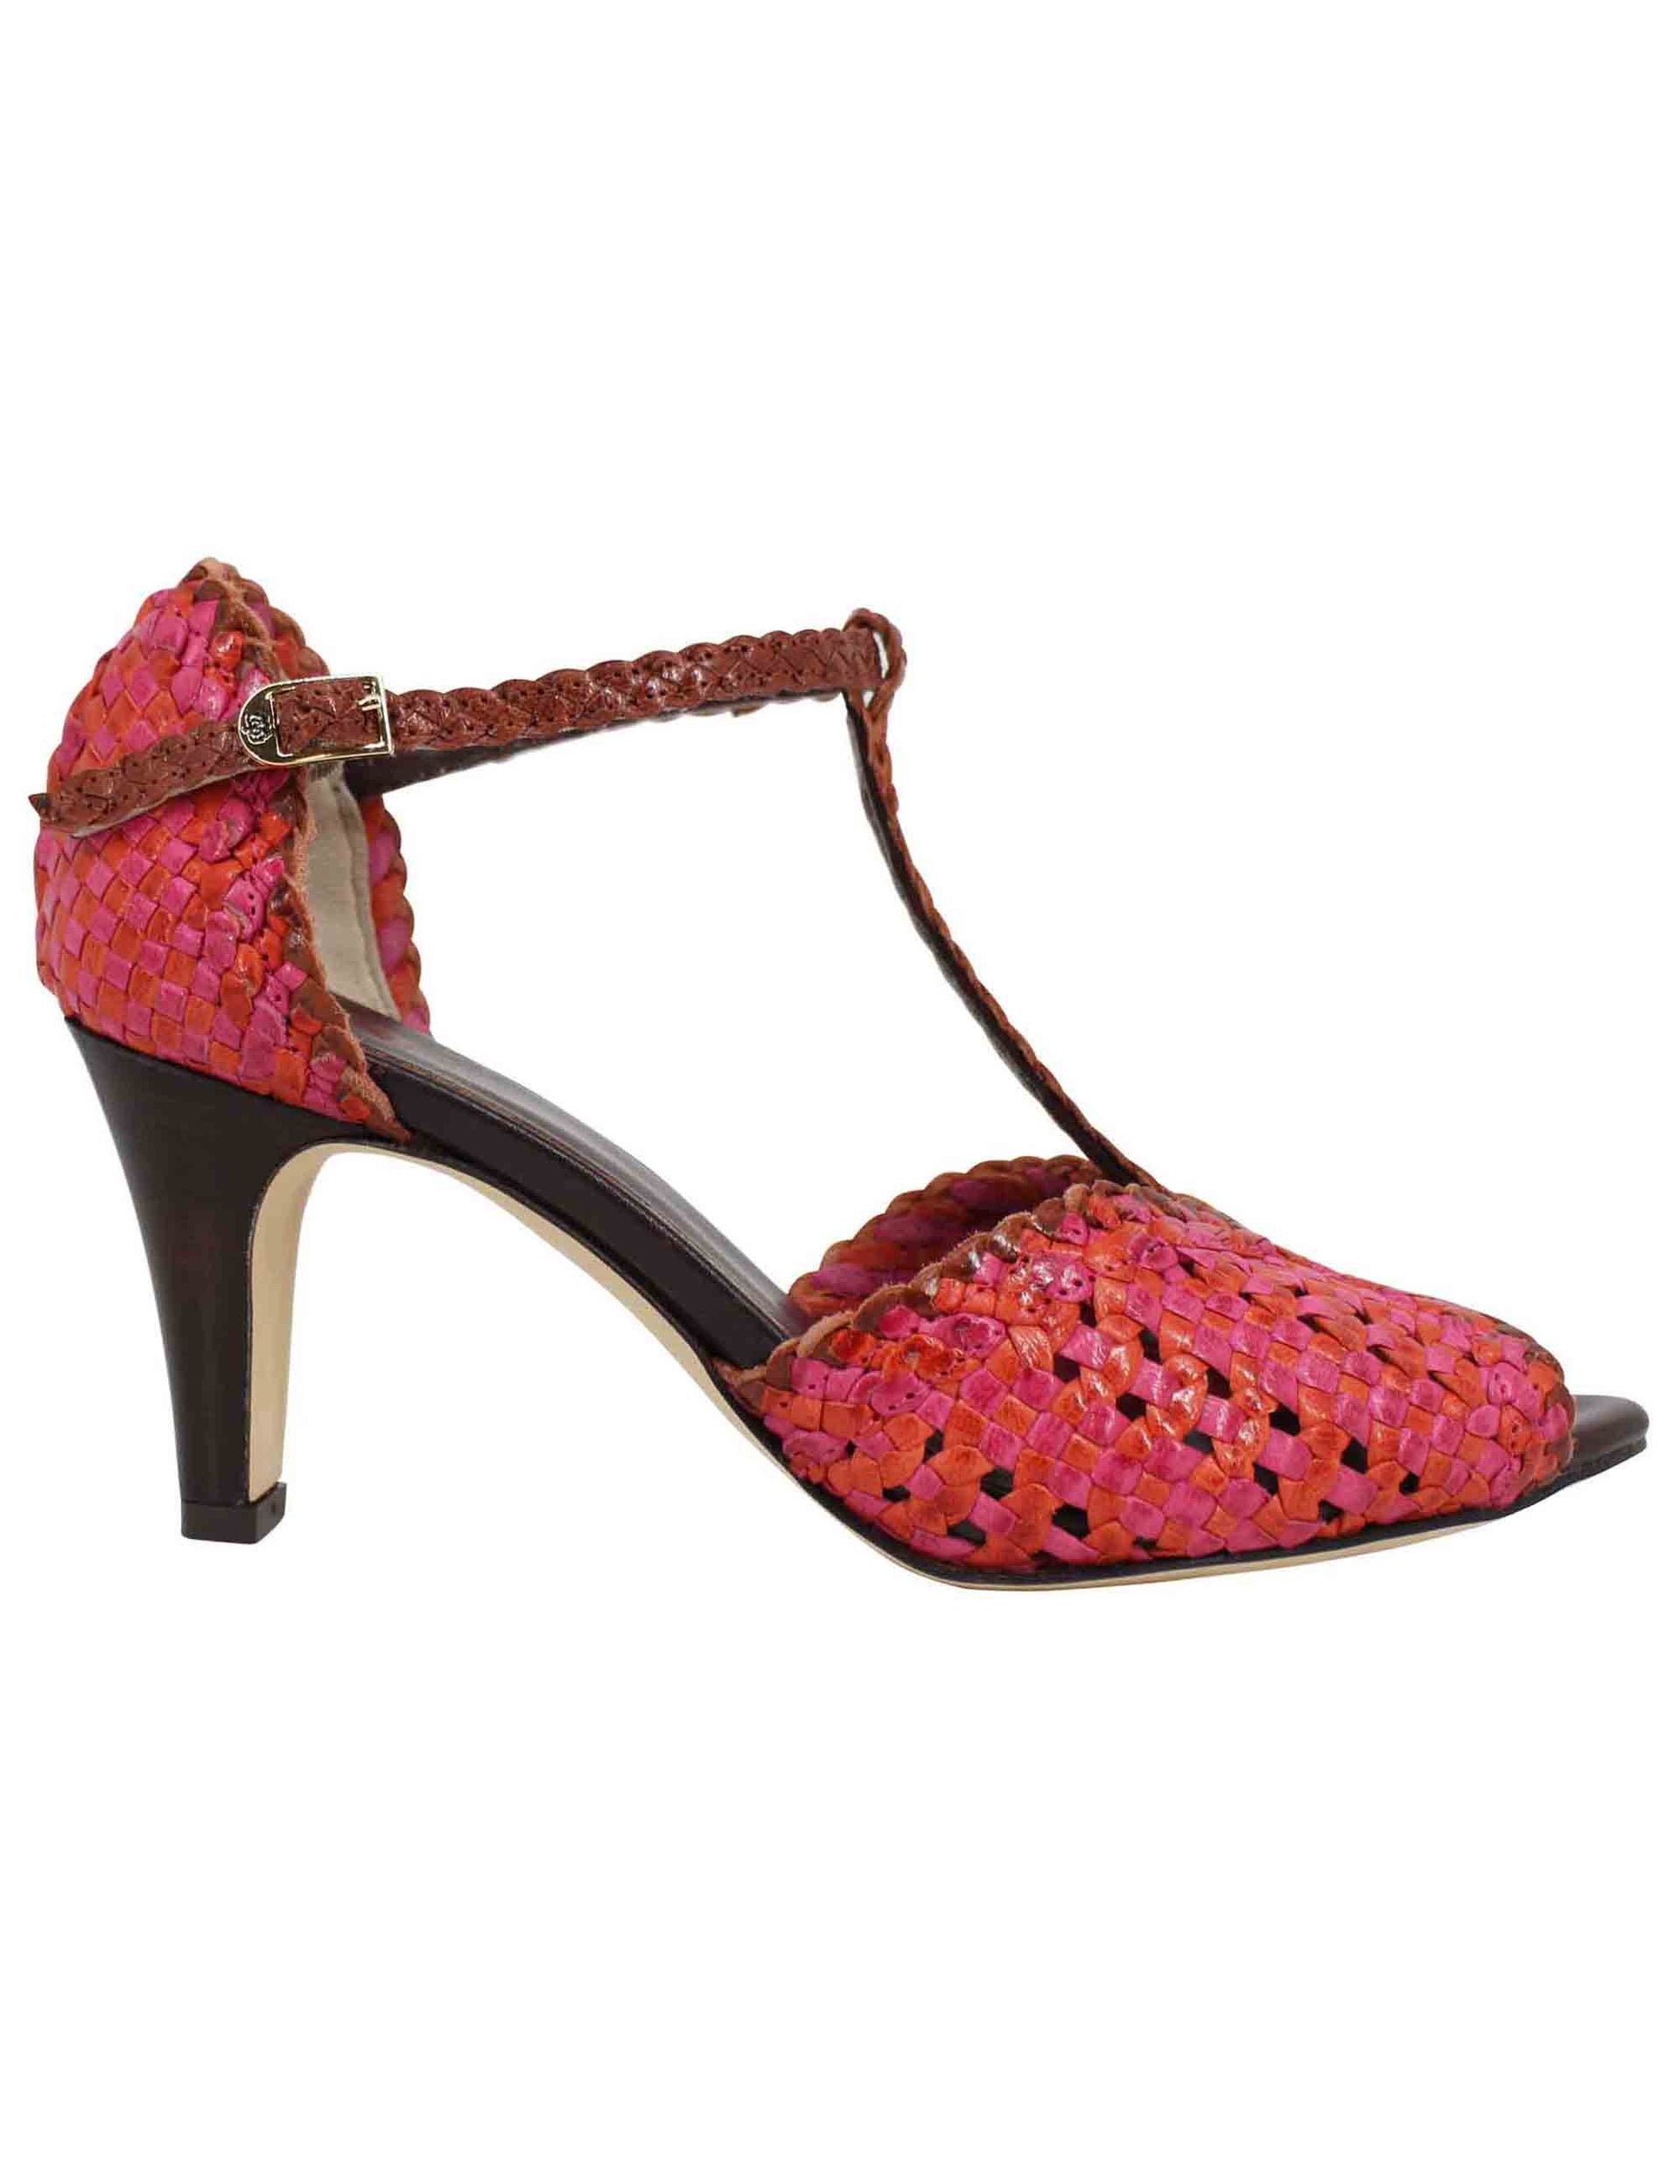 Women's sandals in fuchsia woven leather with high heel